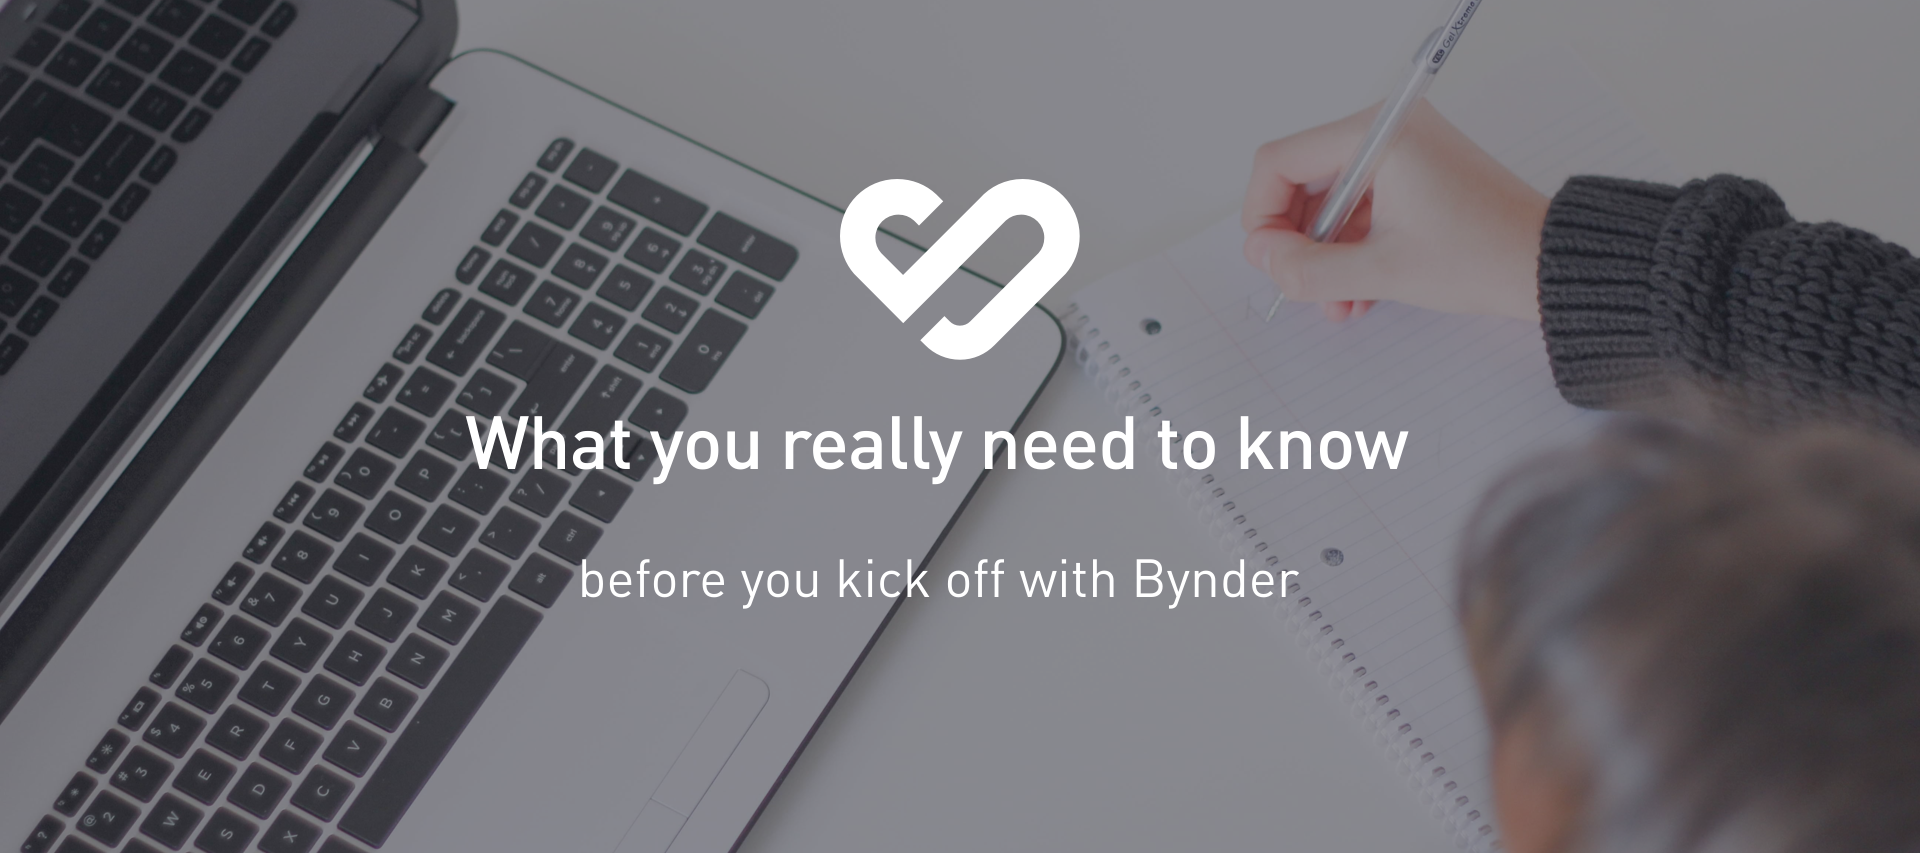 What you really need to know before your kick off with Bynder